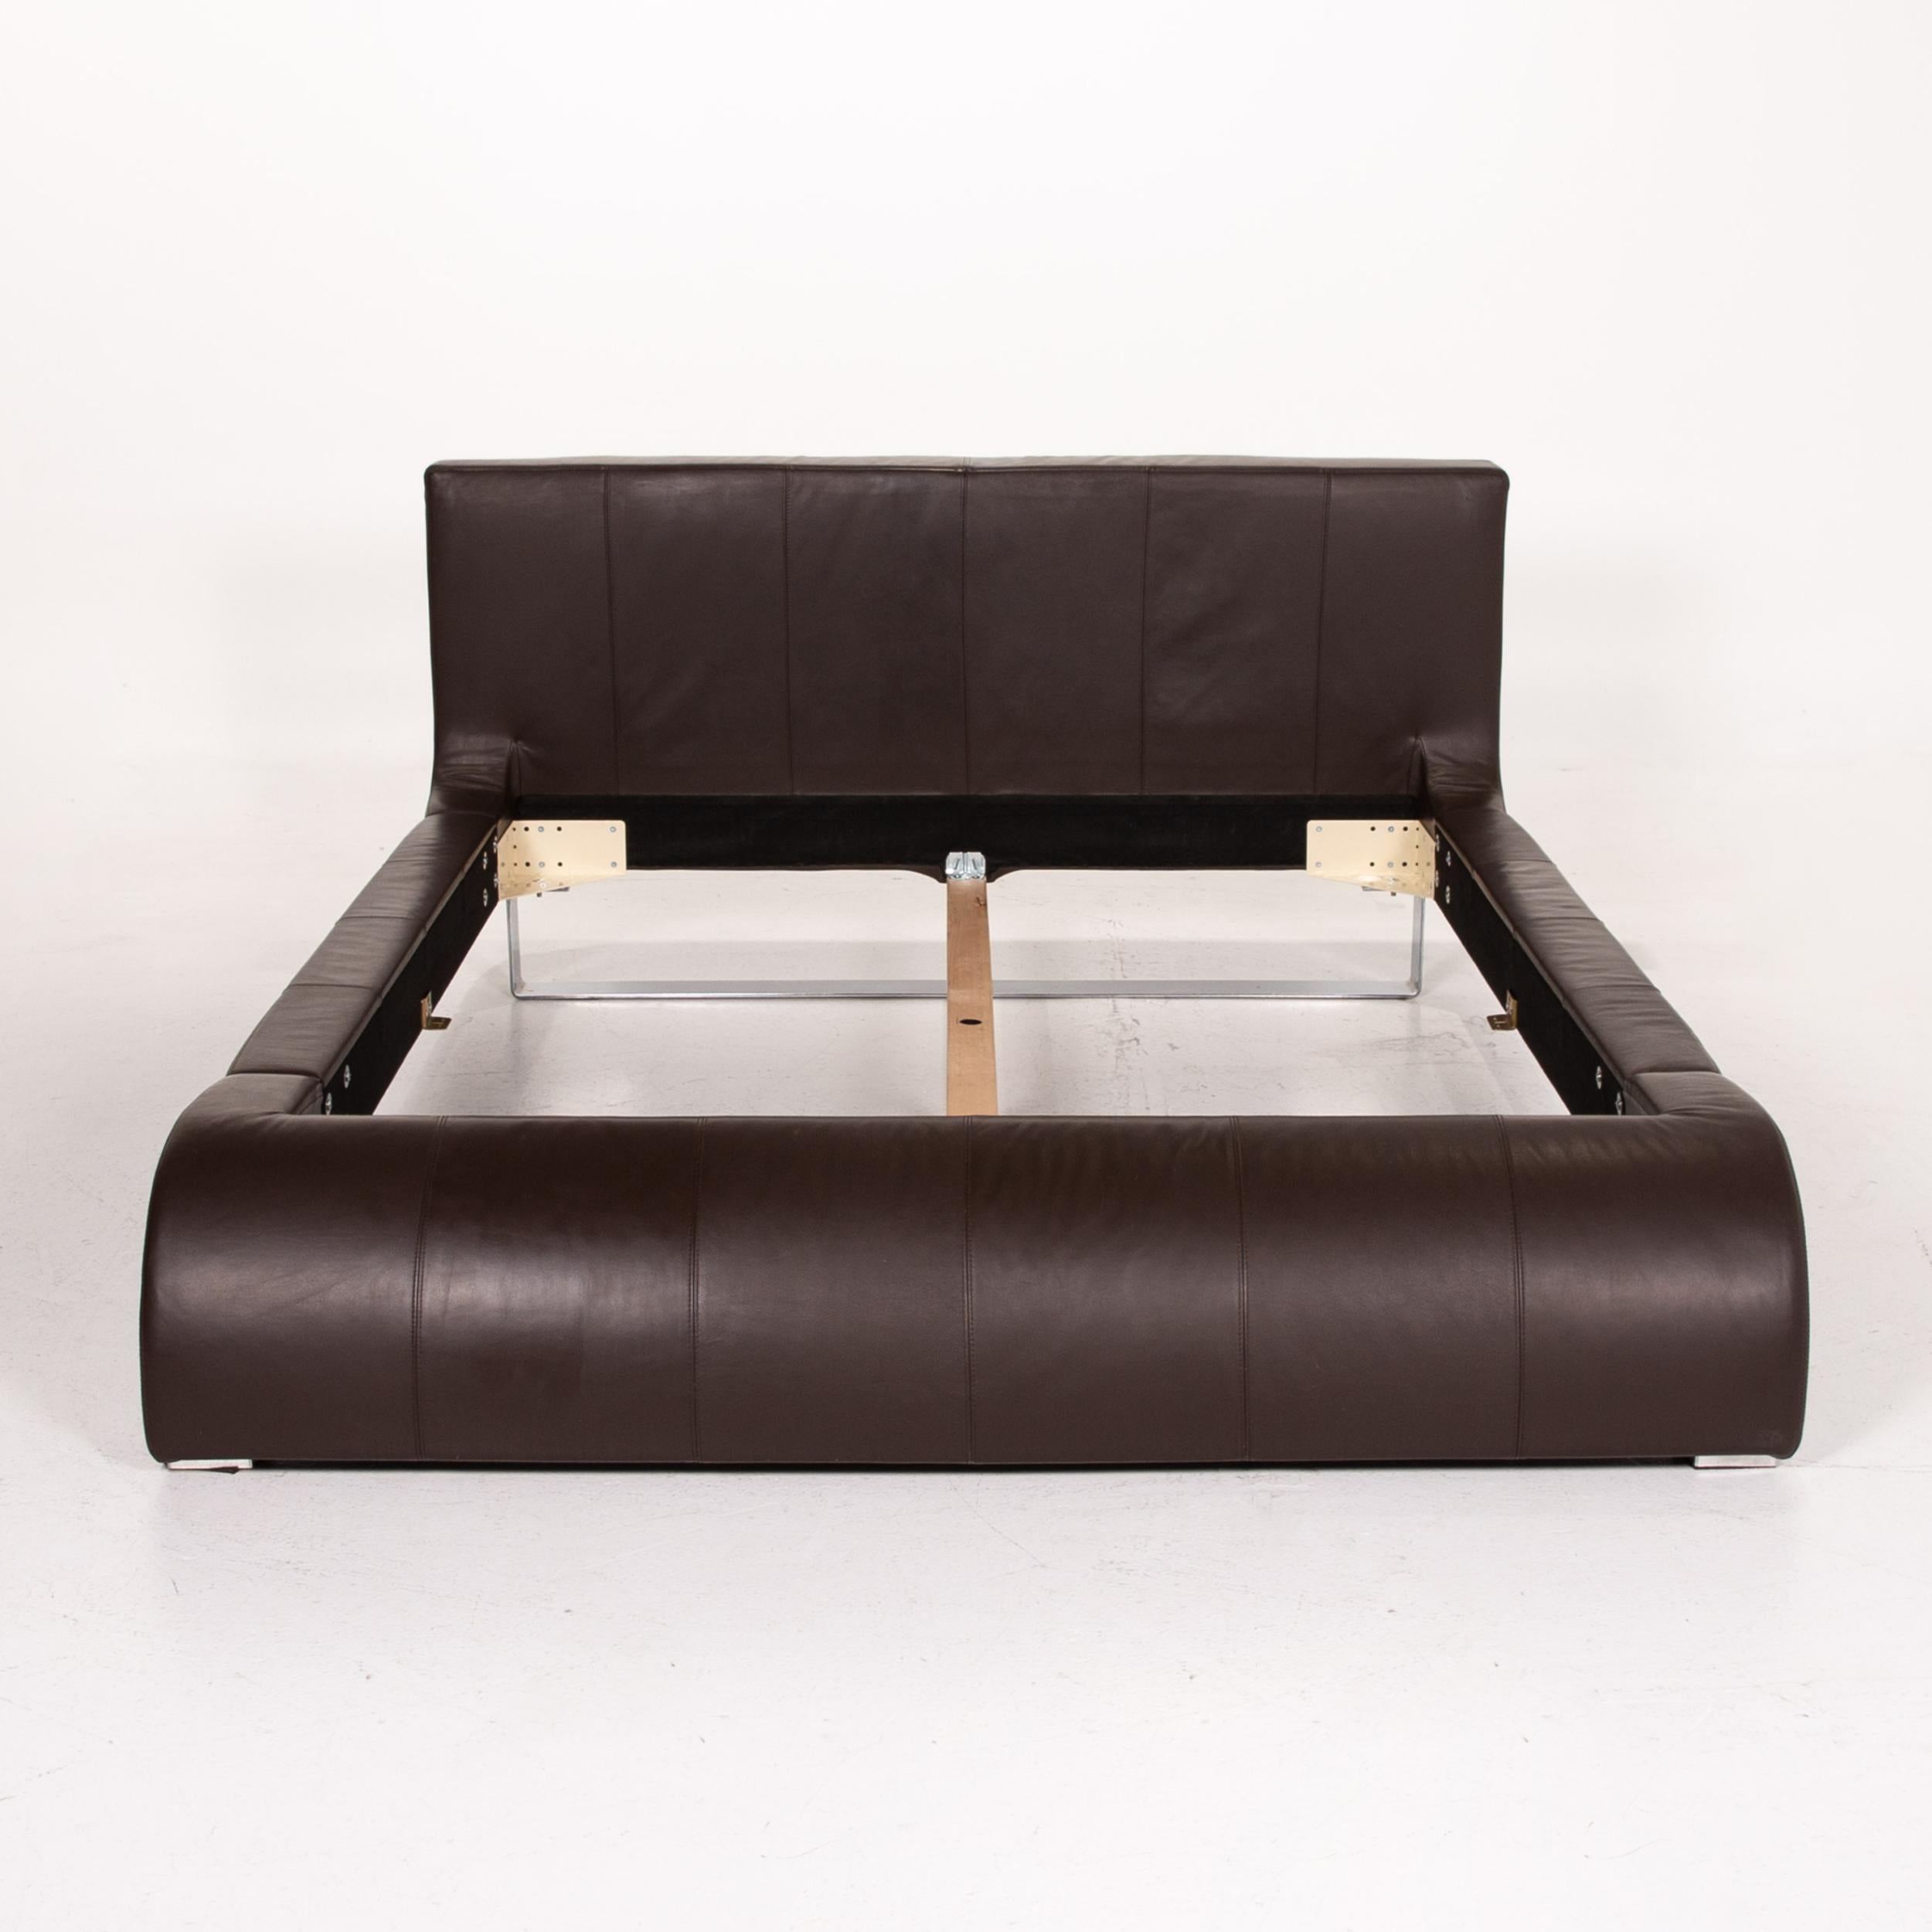 Polish Joop! Swing Leather Double Bed Brown Dark Brown Bed For Sale